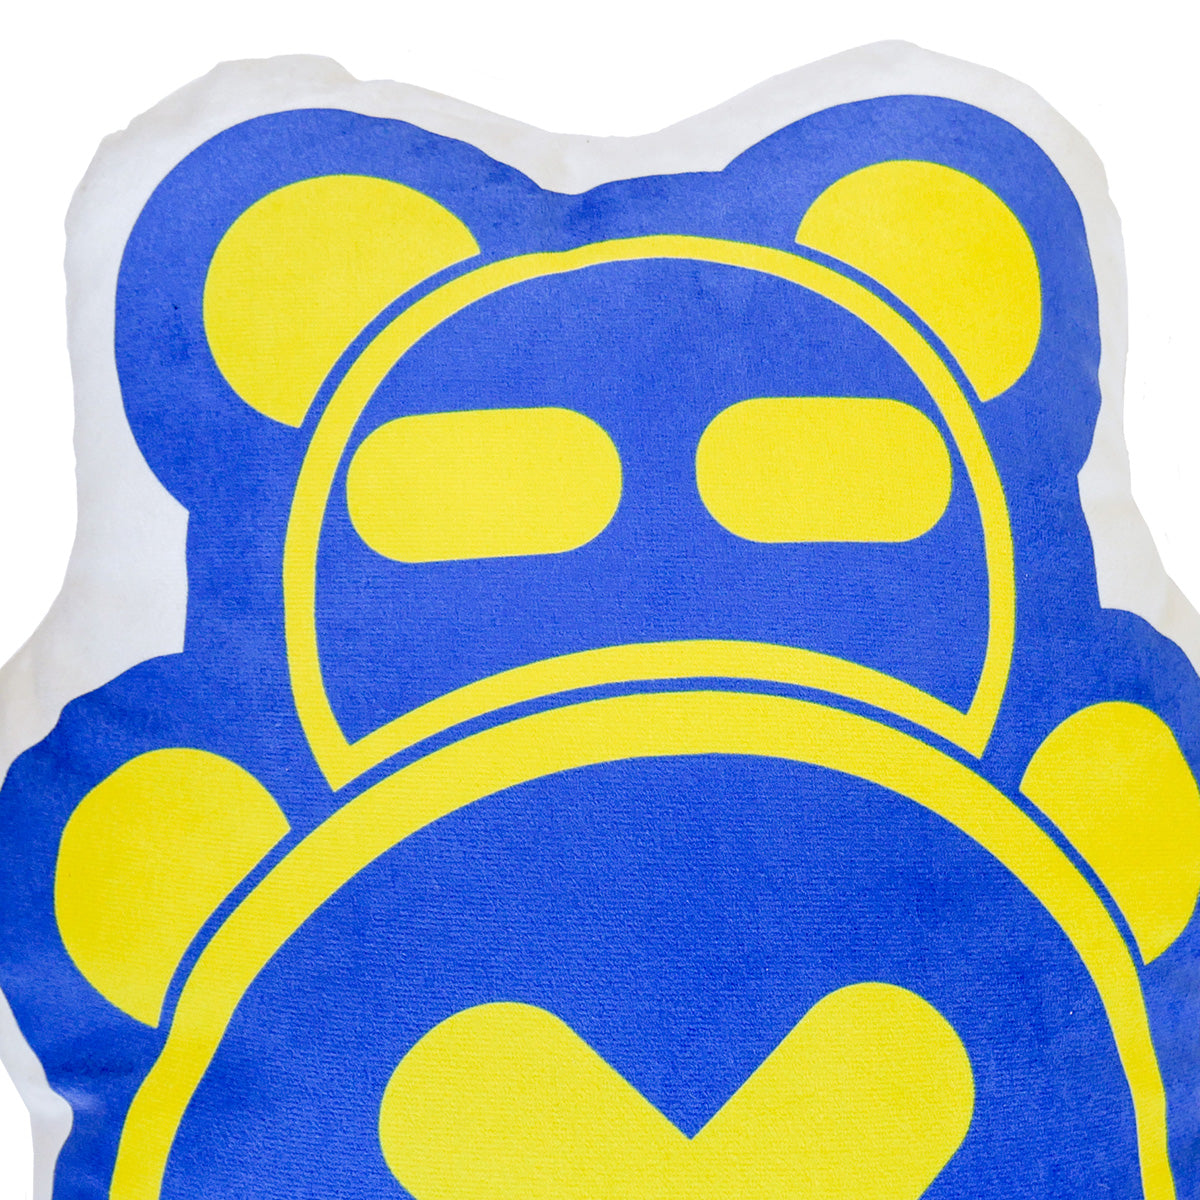 A zoomed-in image of the top-half of the Timmy Pillow plush.